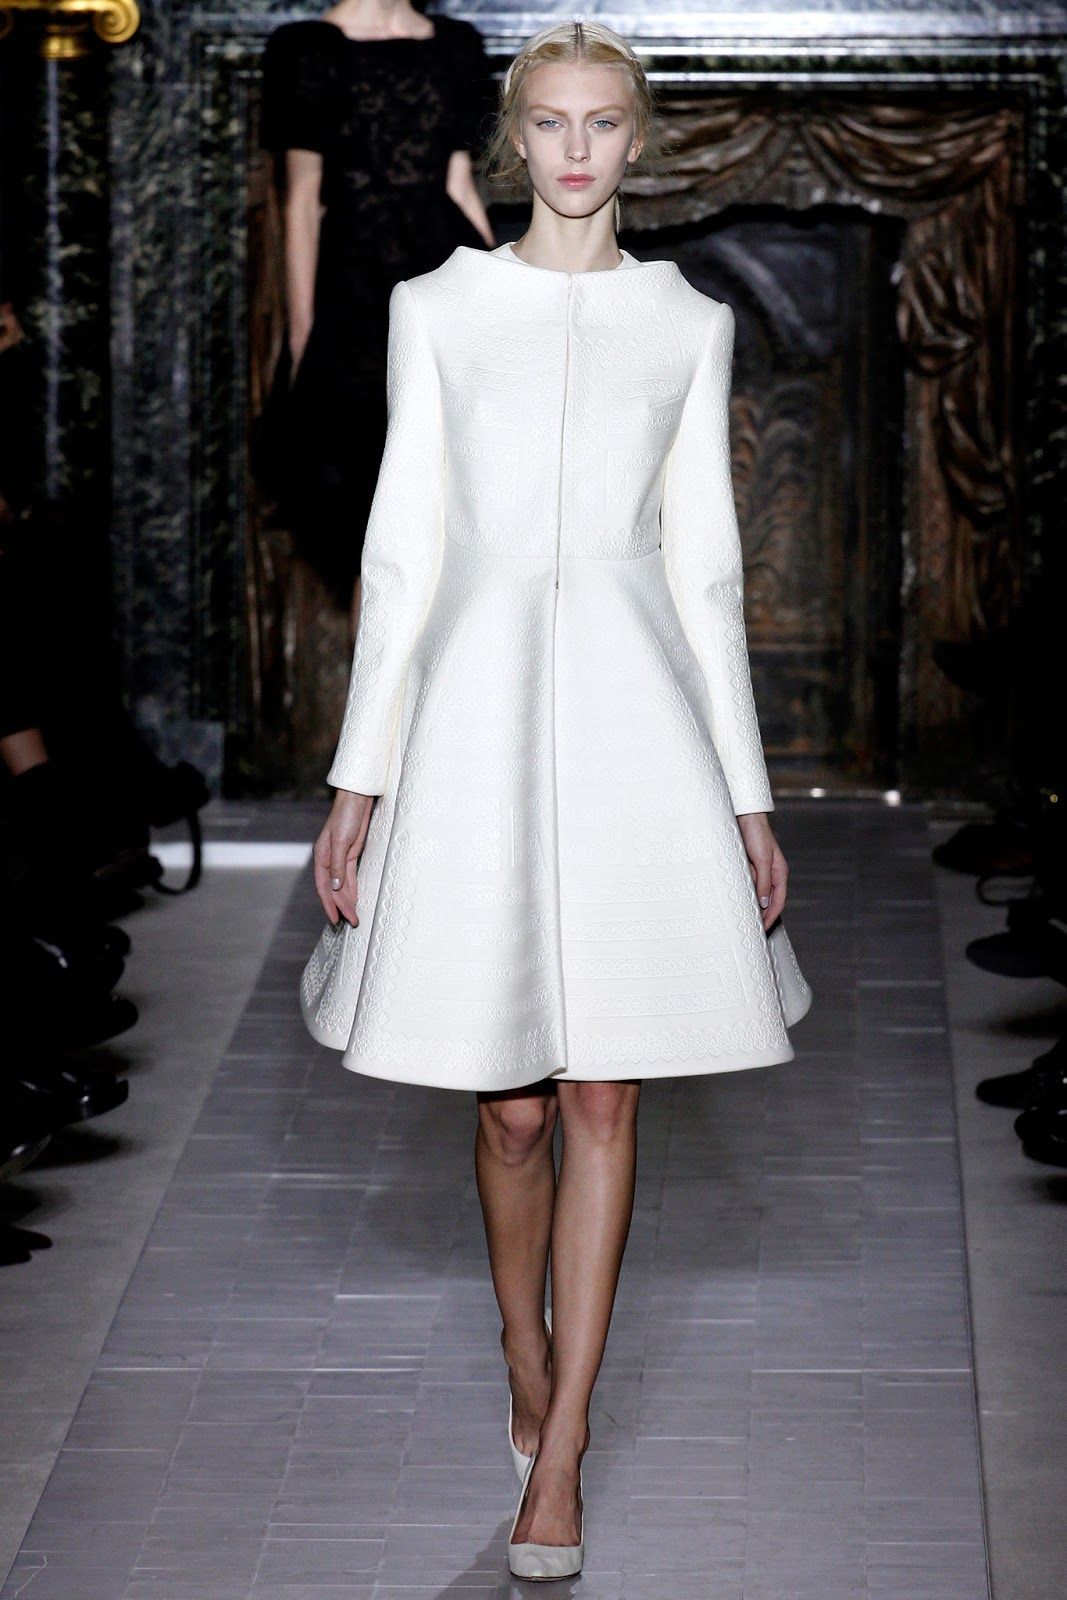 Valentino Haute Couture Spring/Summer 2013 collection | Fab Fashion Fix